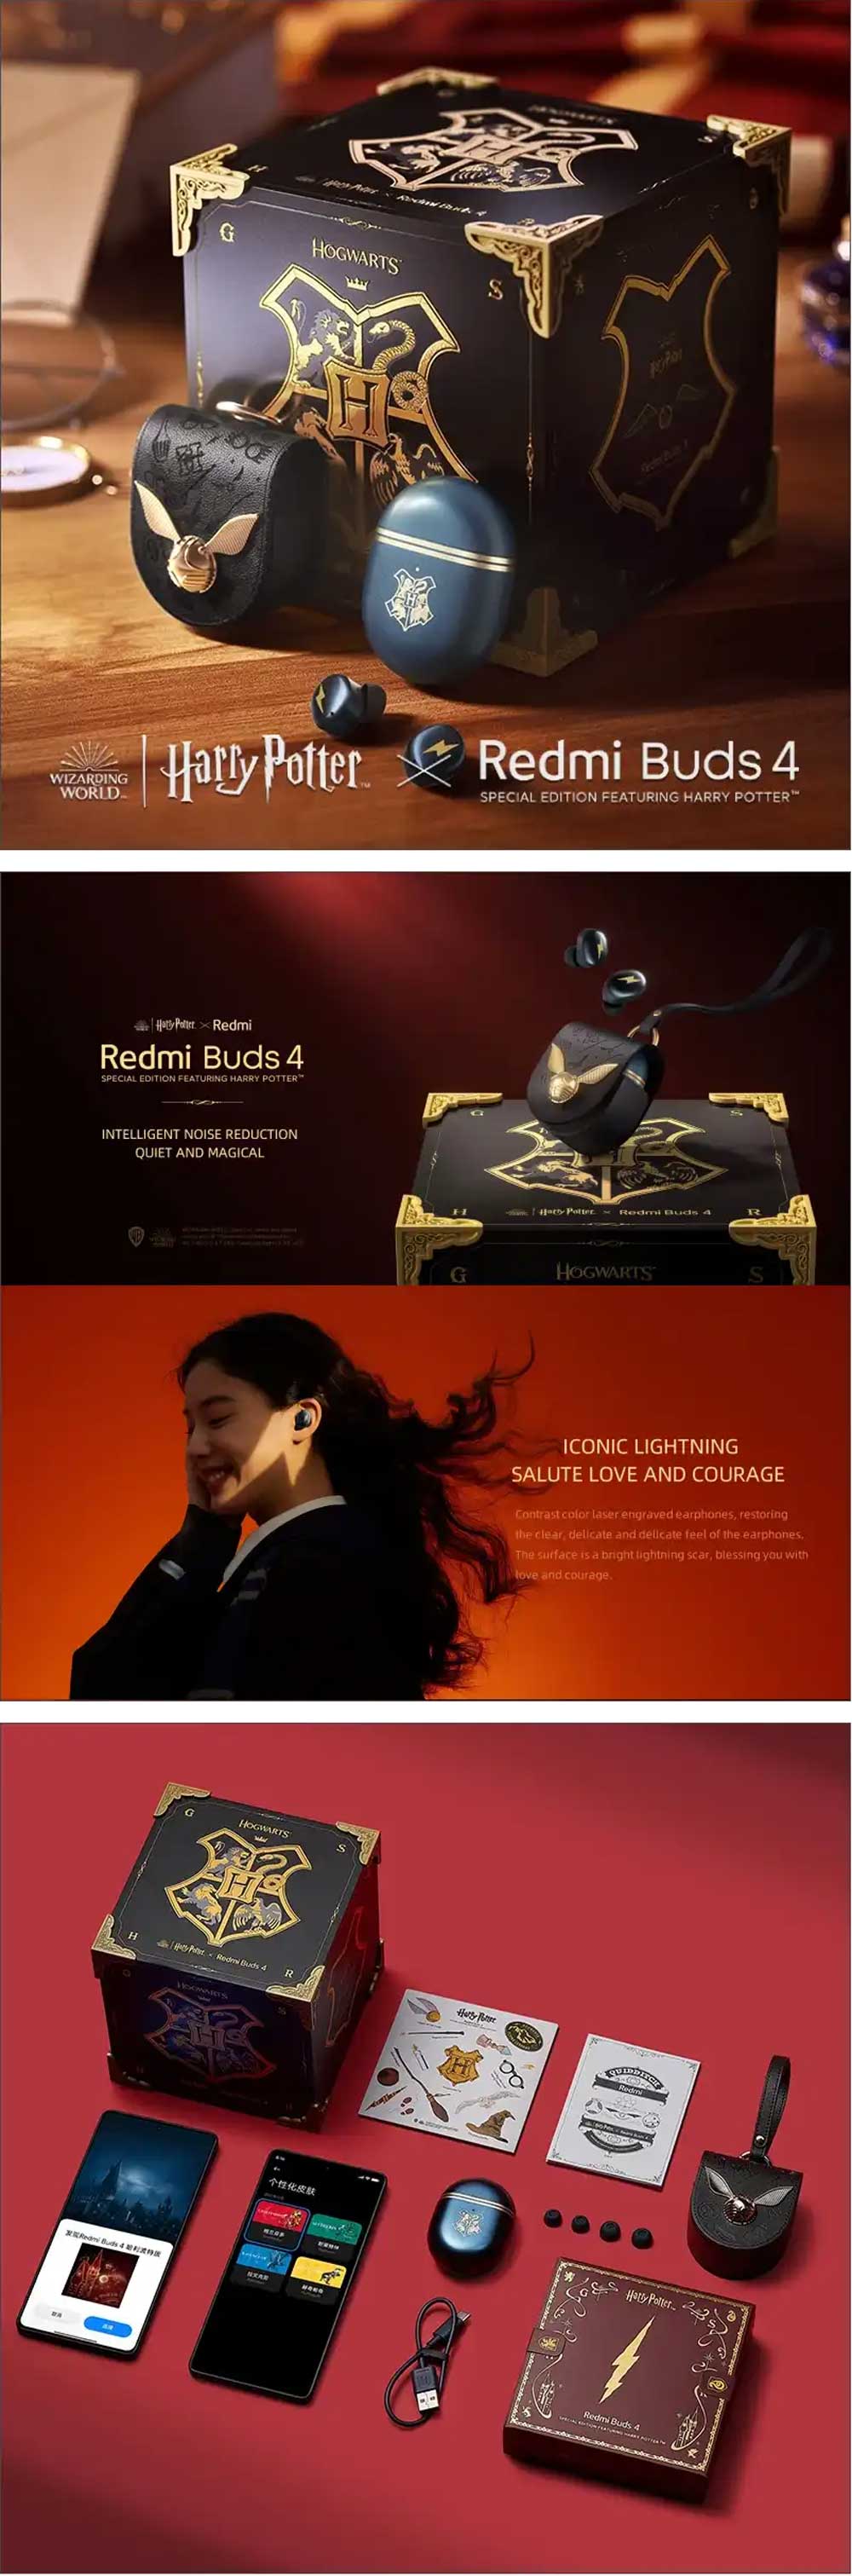 Redmi Buds 4 Harry Potter Edition 4